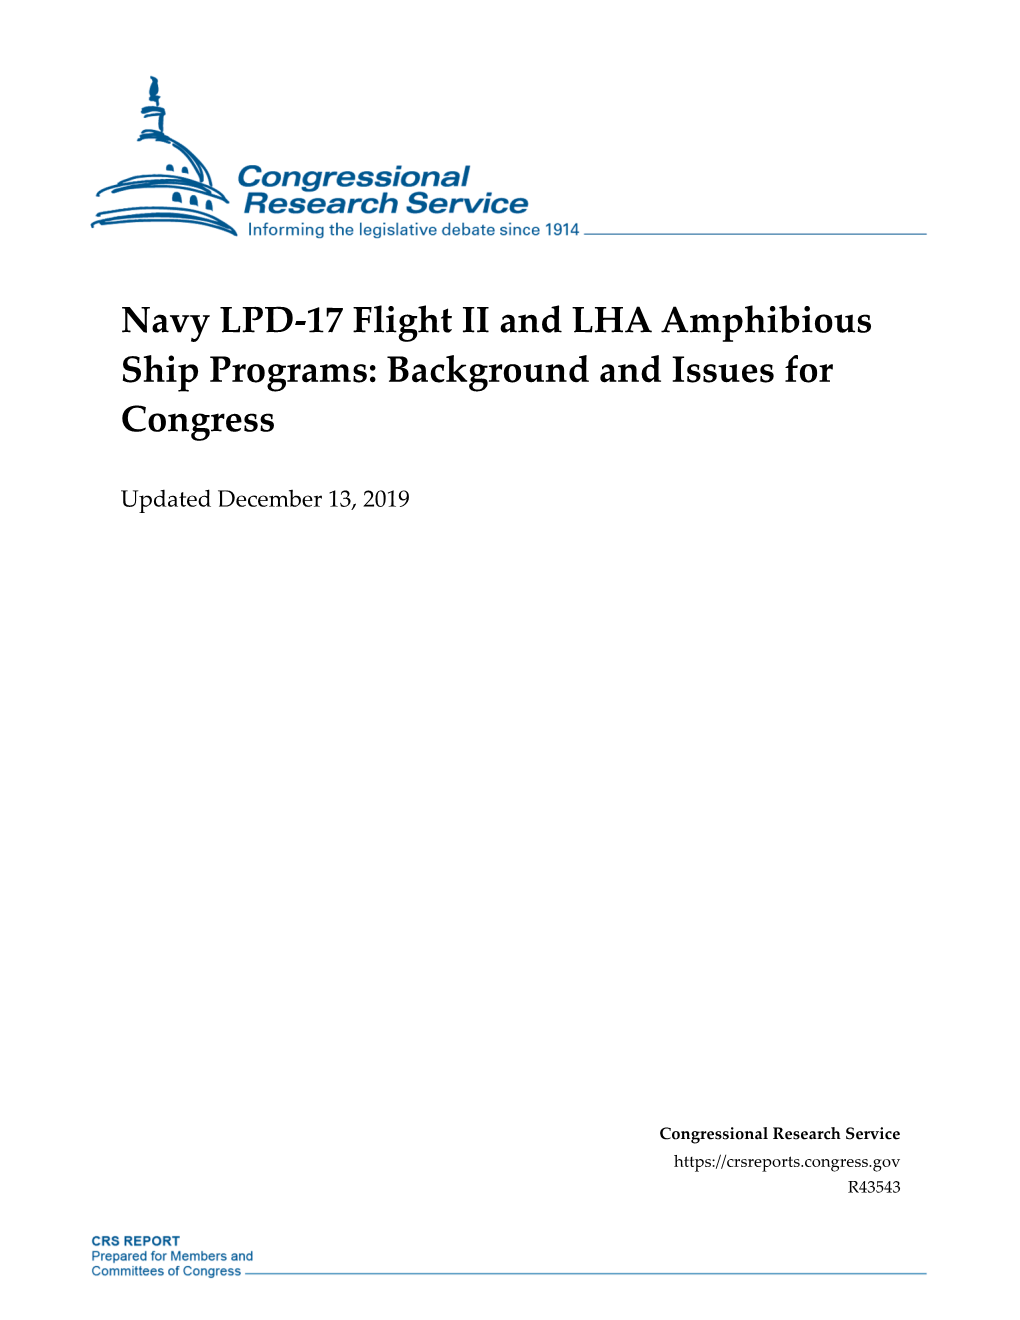 Navy LPD-17 Flight II and LHA Amphibious Ship Programs: Background and Issues for Congress